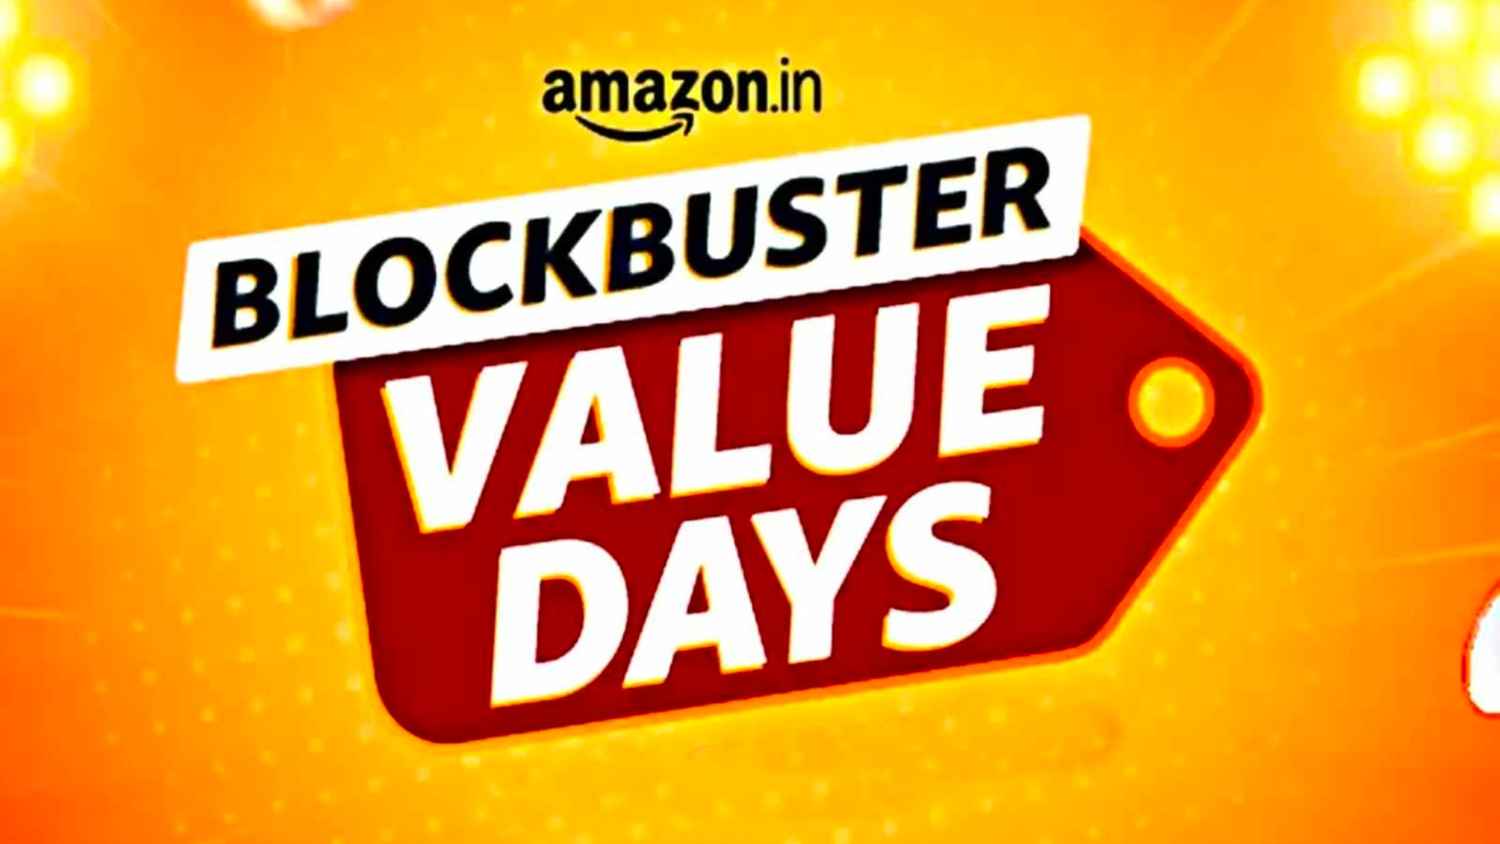 Amazon Blockbuster Value Days: 5 best-selling yet affordable phones on sale